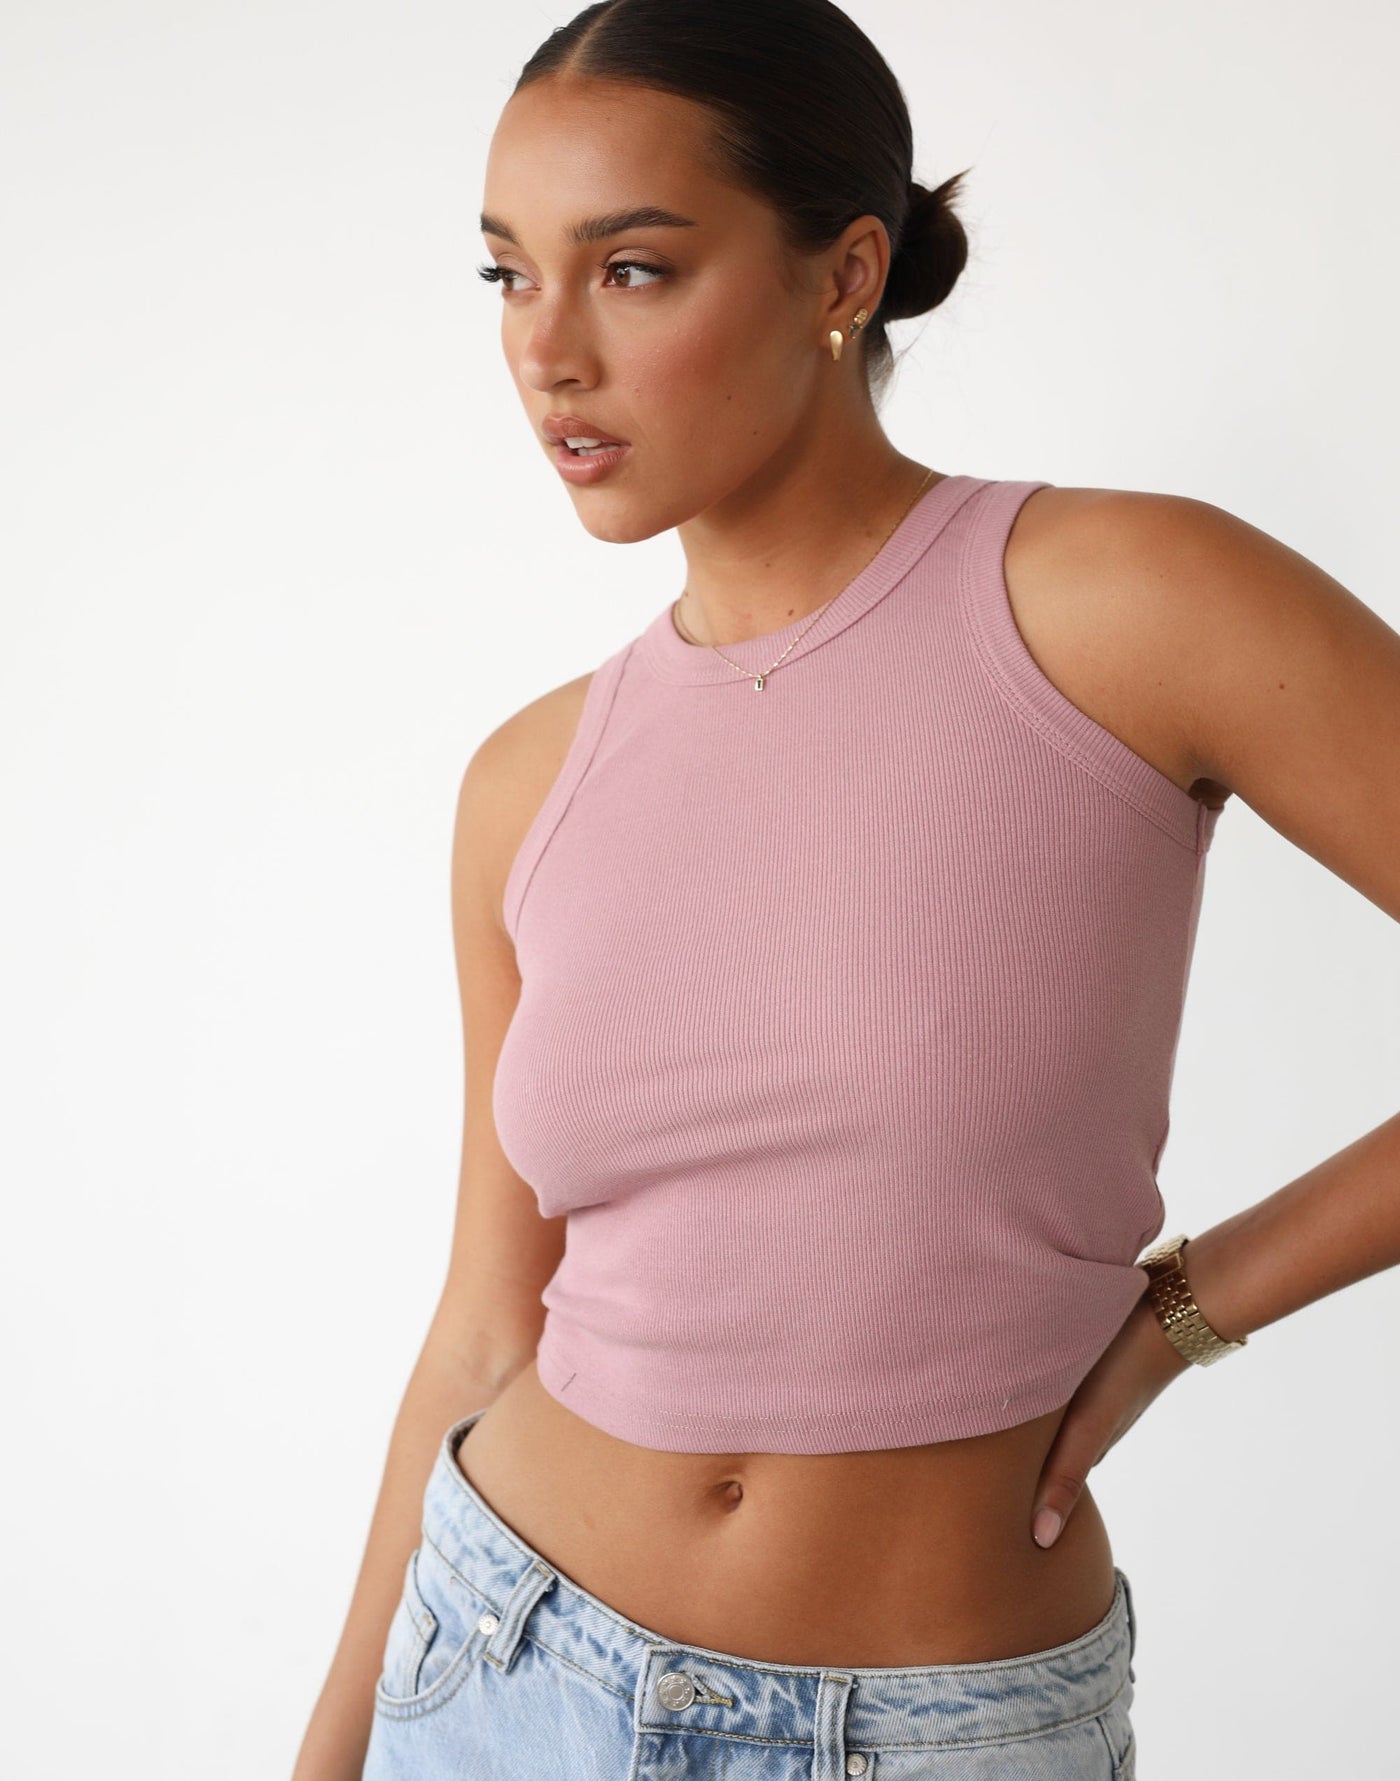 Cornell Tank Top (Mauve) | Ribbed Tank Top - Women's Top - Charcoal Clothing